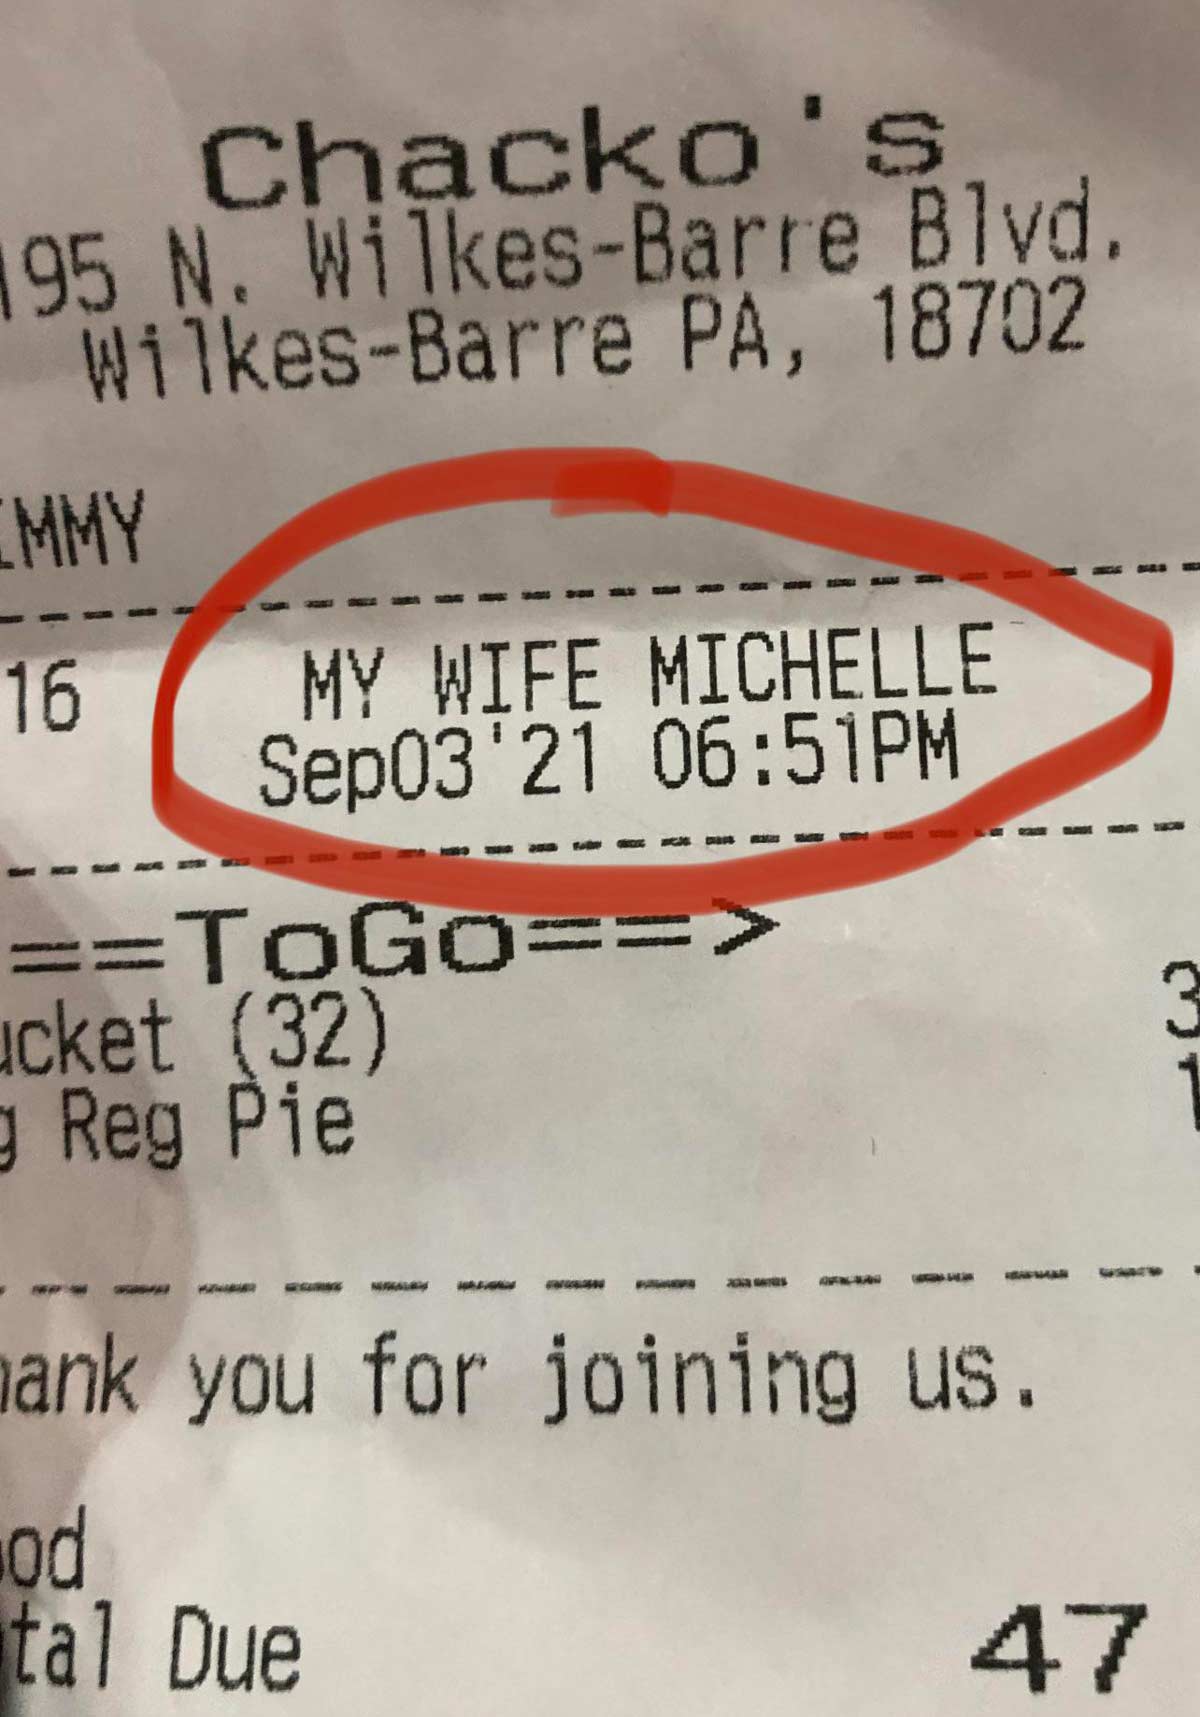 Pizza shop asked me "who’s name do you want the order under?" I replied "my wife Michelle", this is how they announced her name when she picked up the food